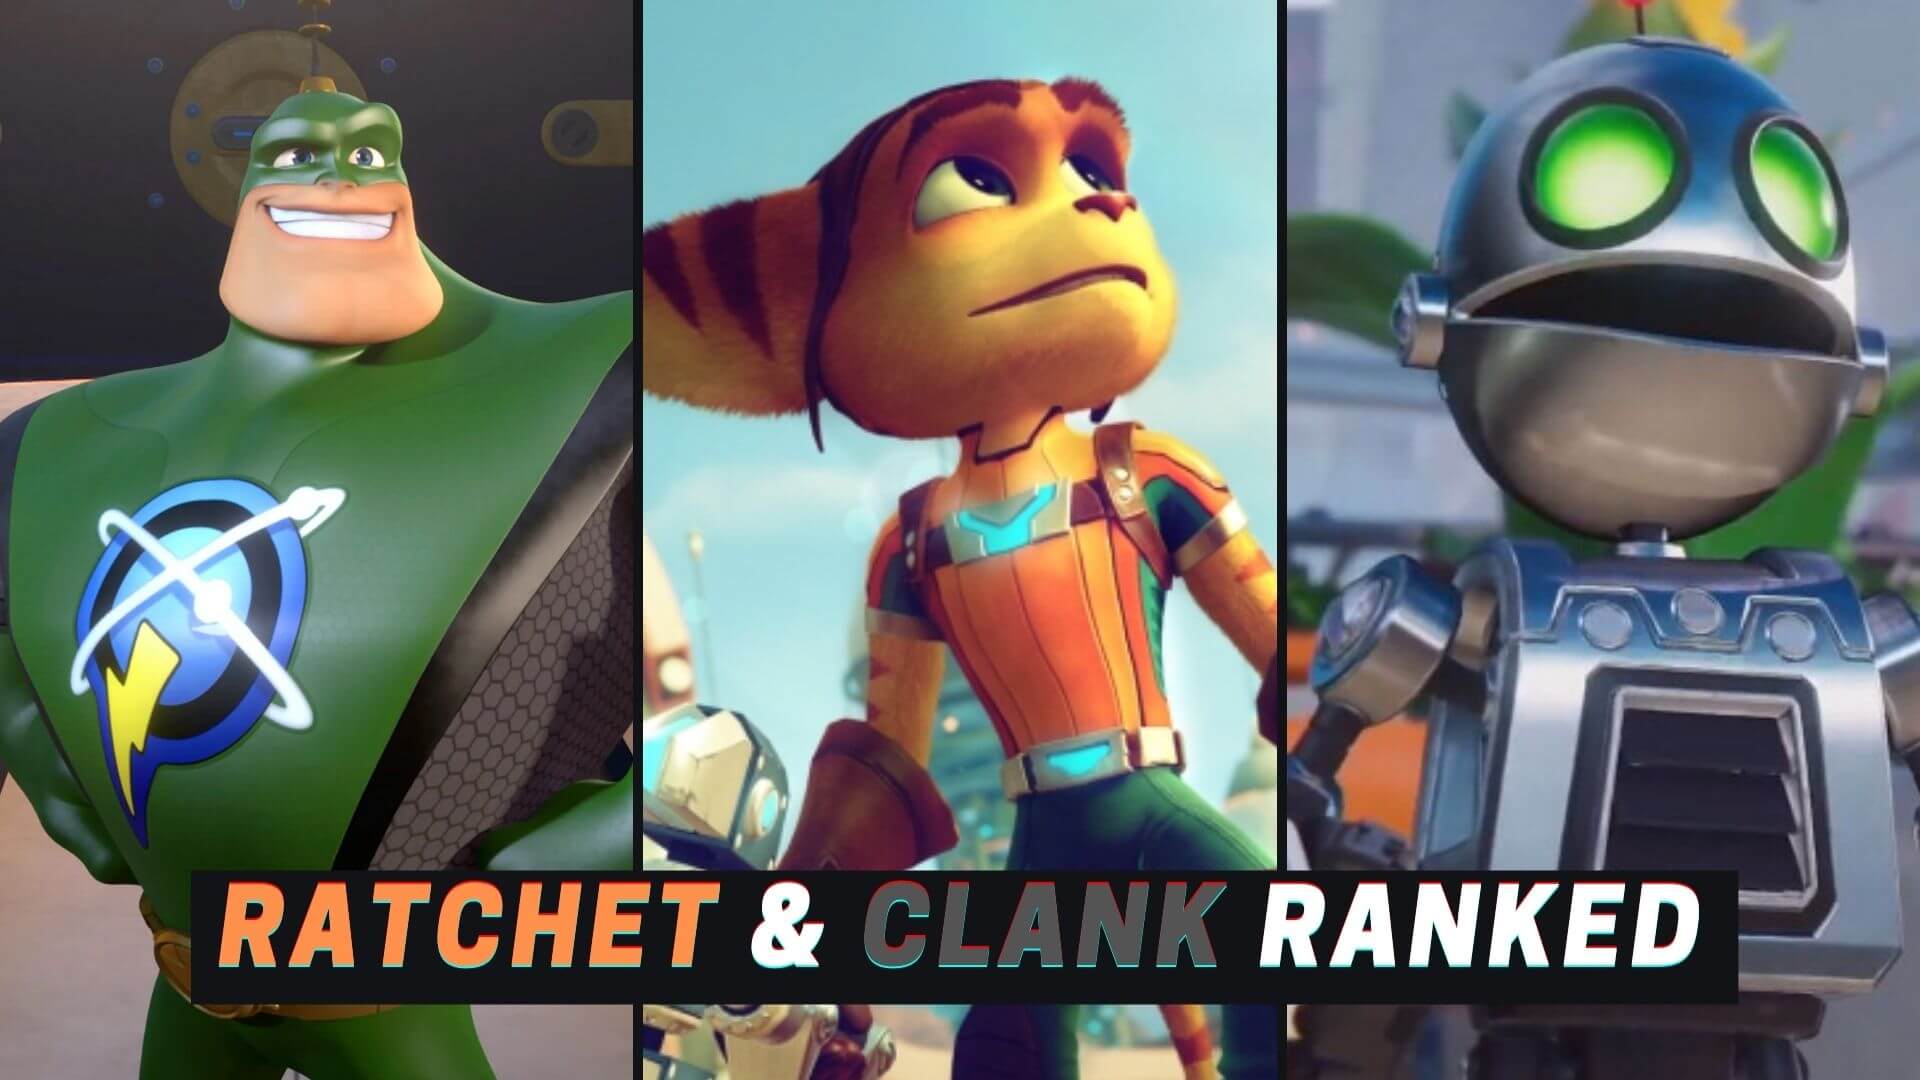 ratchet & clank games ranked